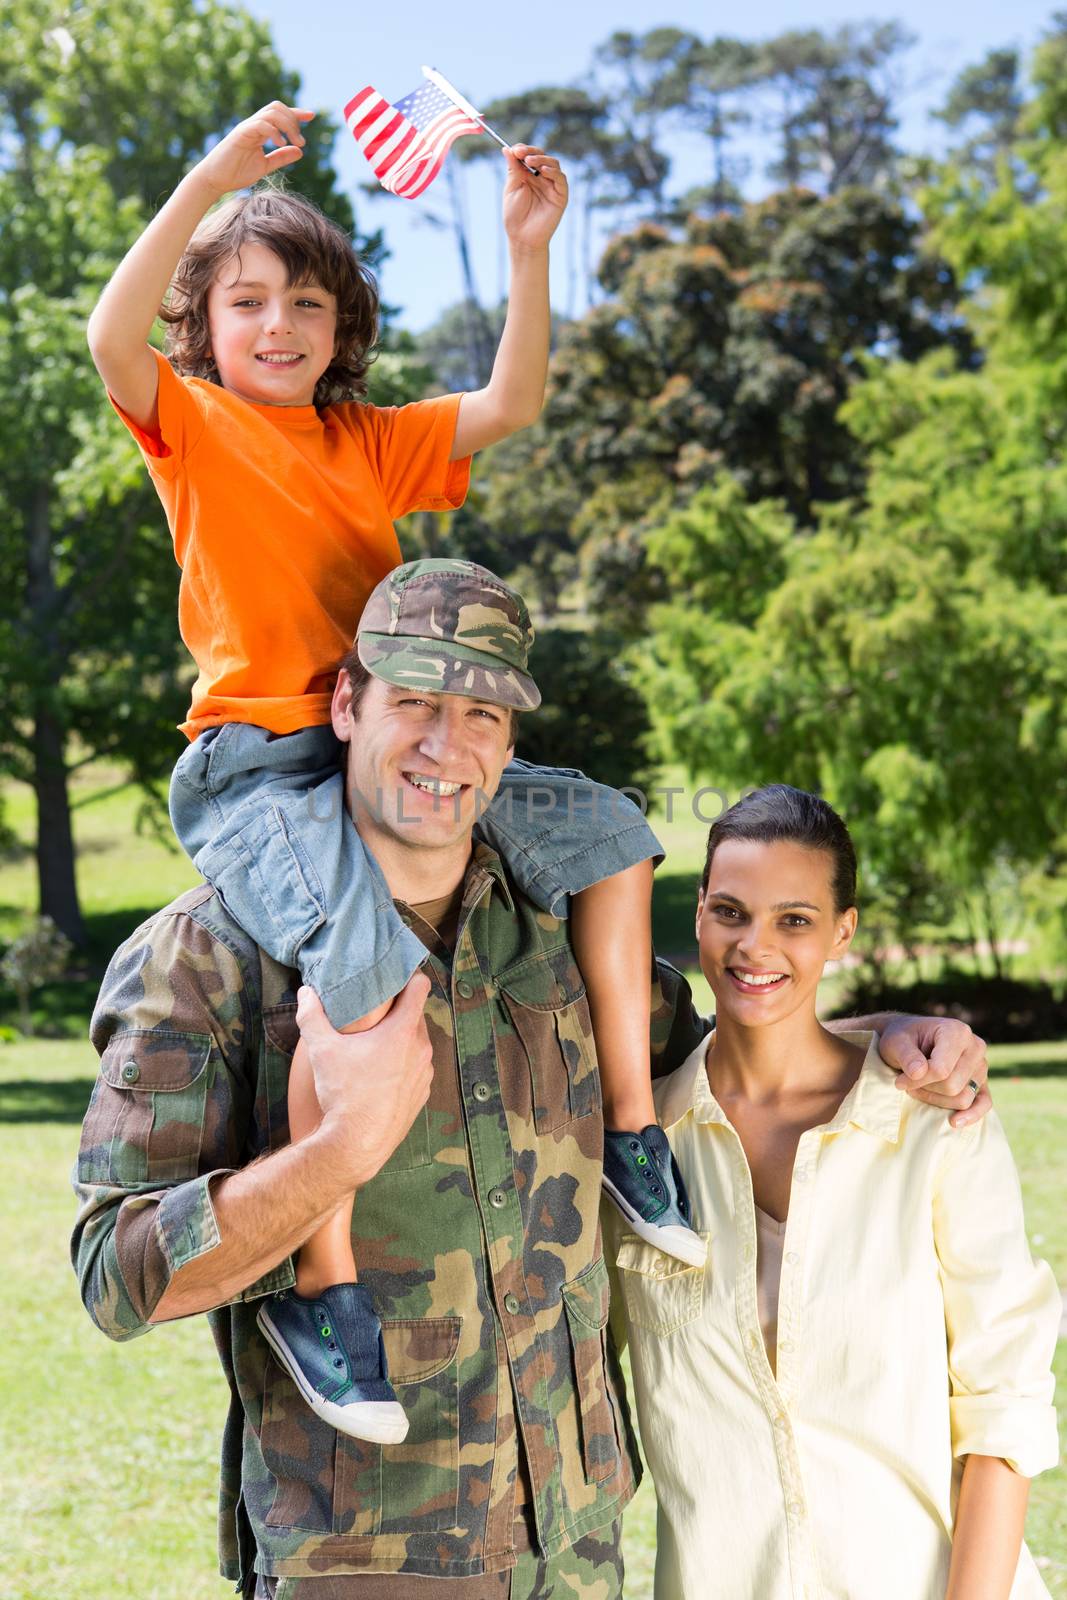 American soldier reunited with family on a sunny day